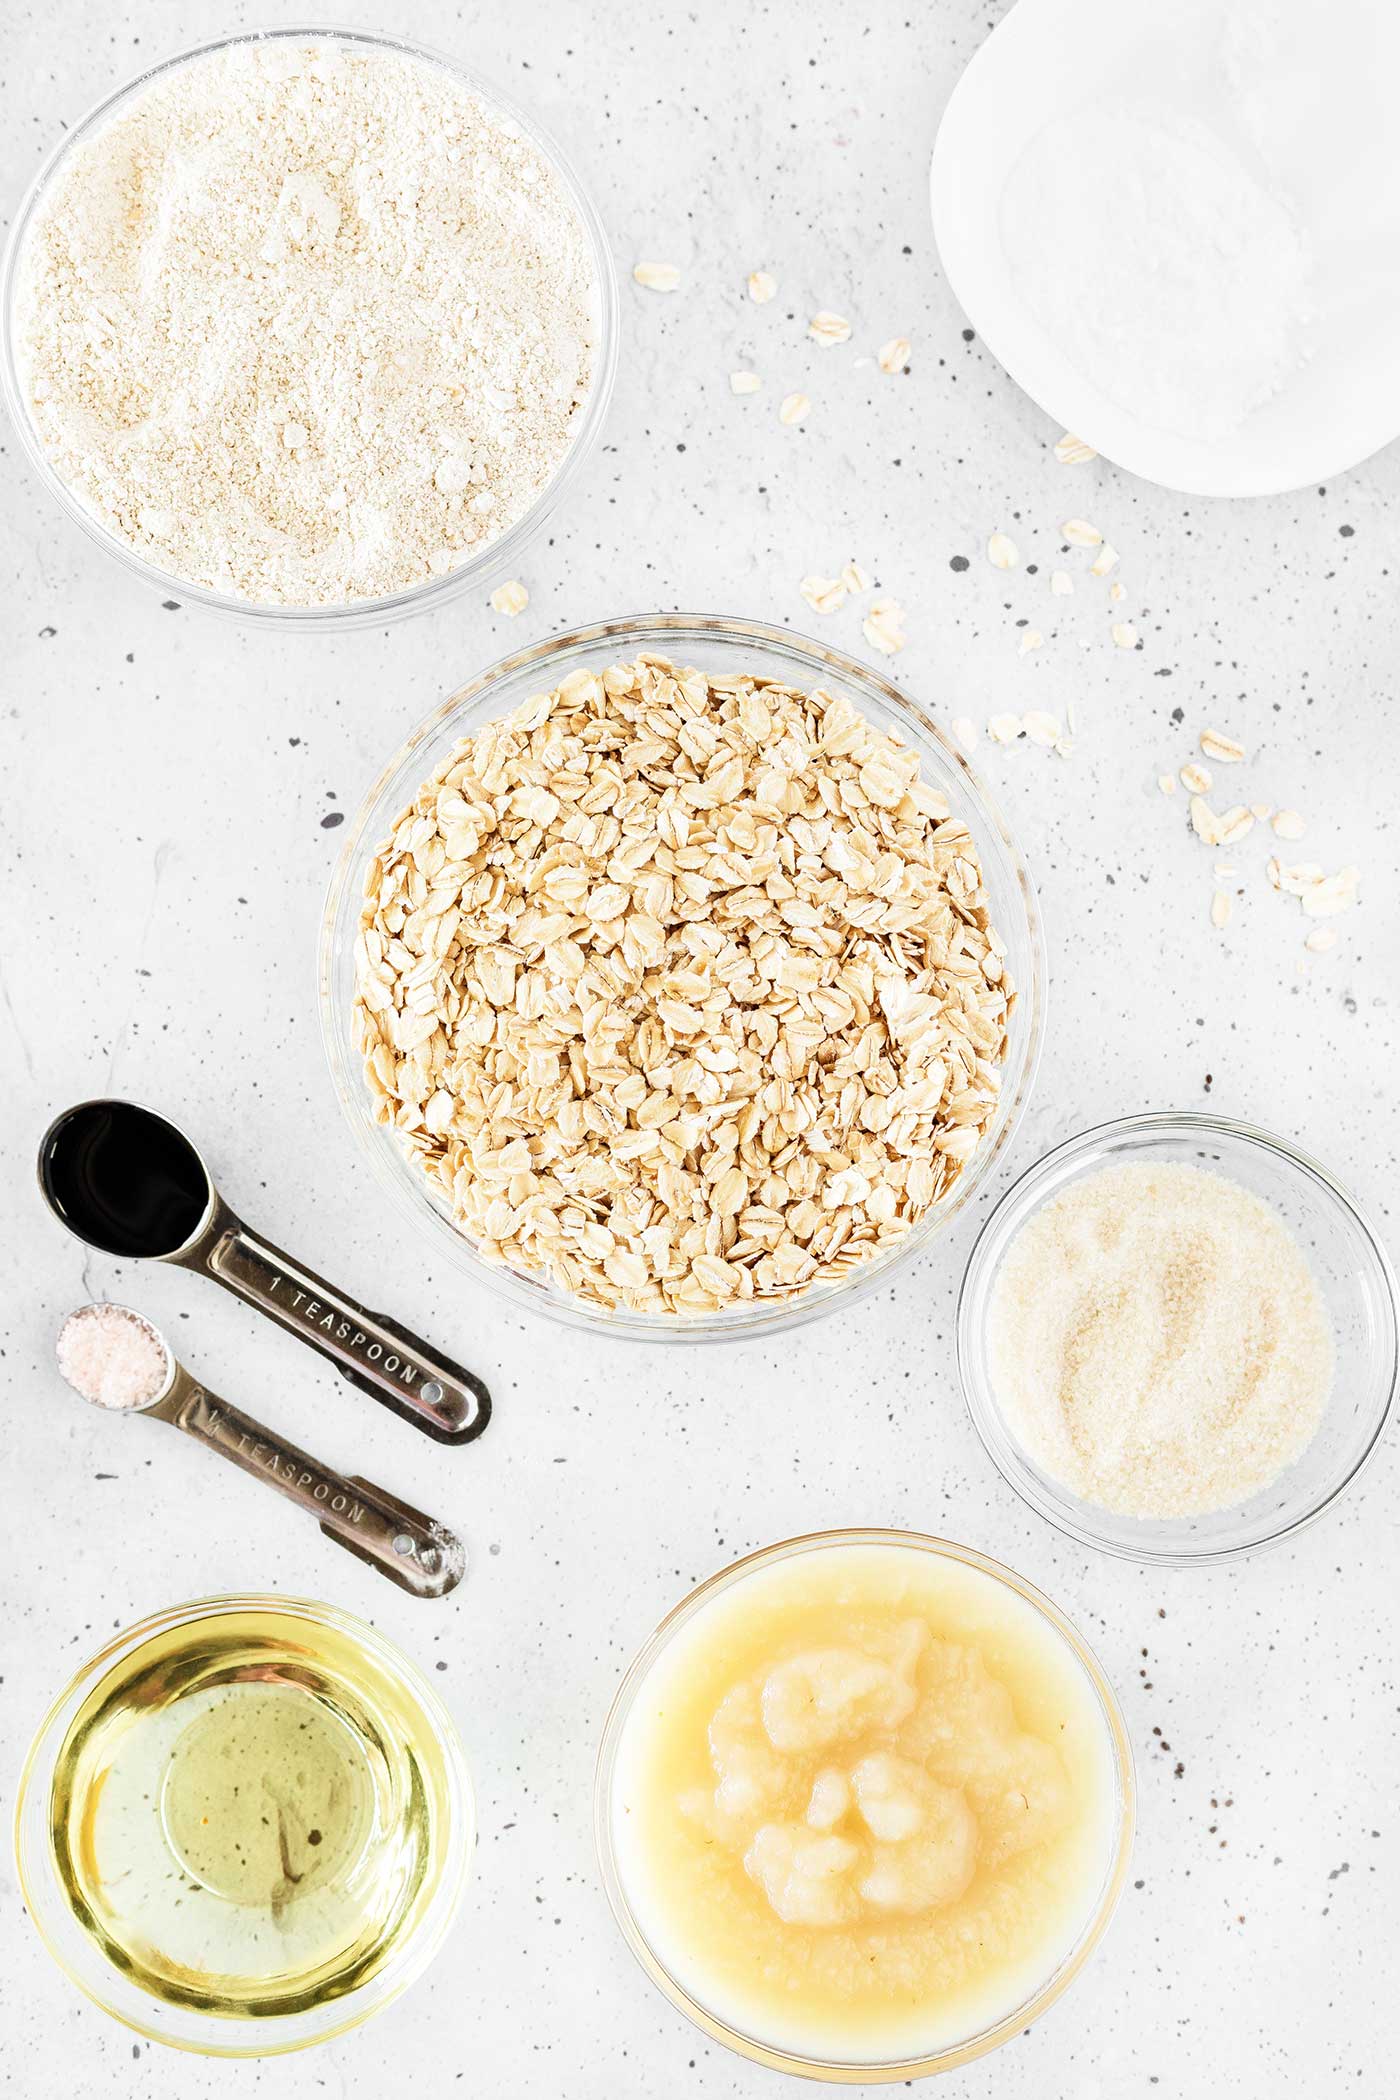 Ingredients for Crust and Crumble on the Homemade Breakfast Bars